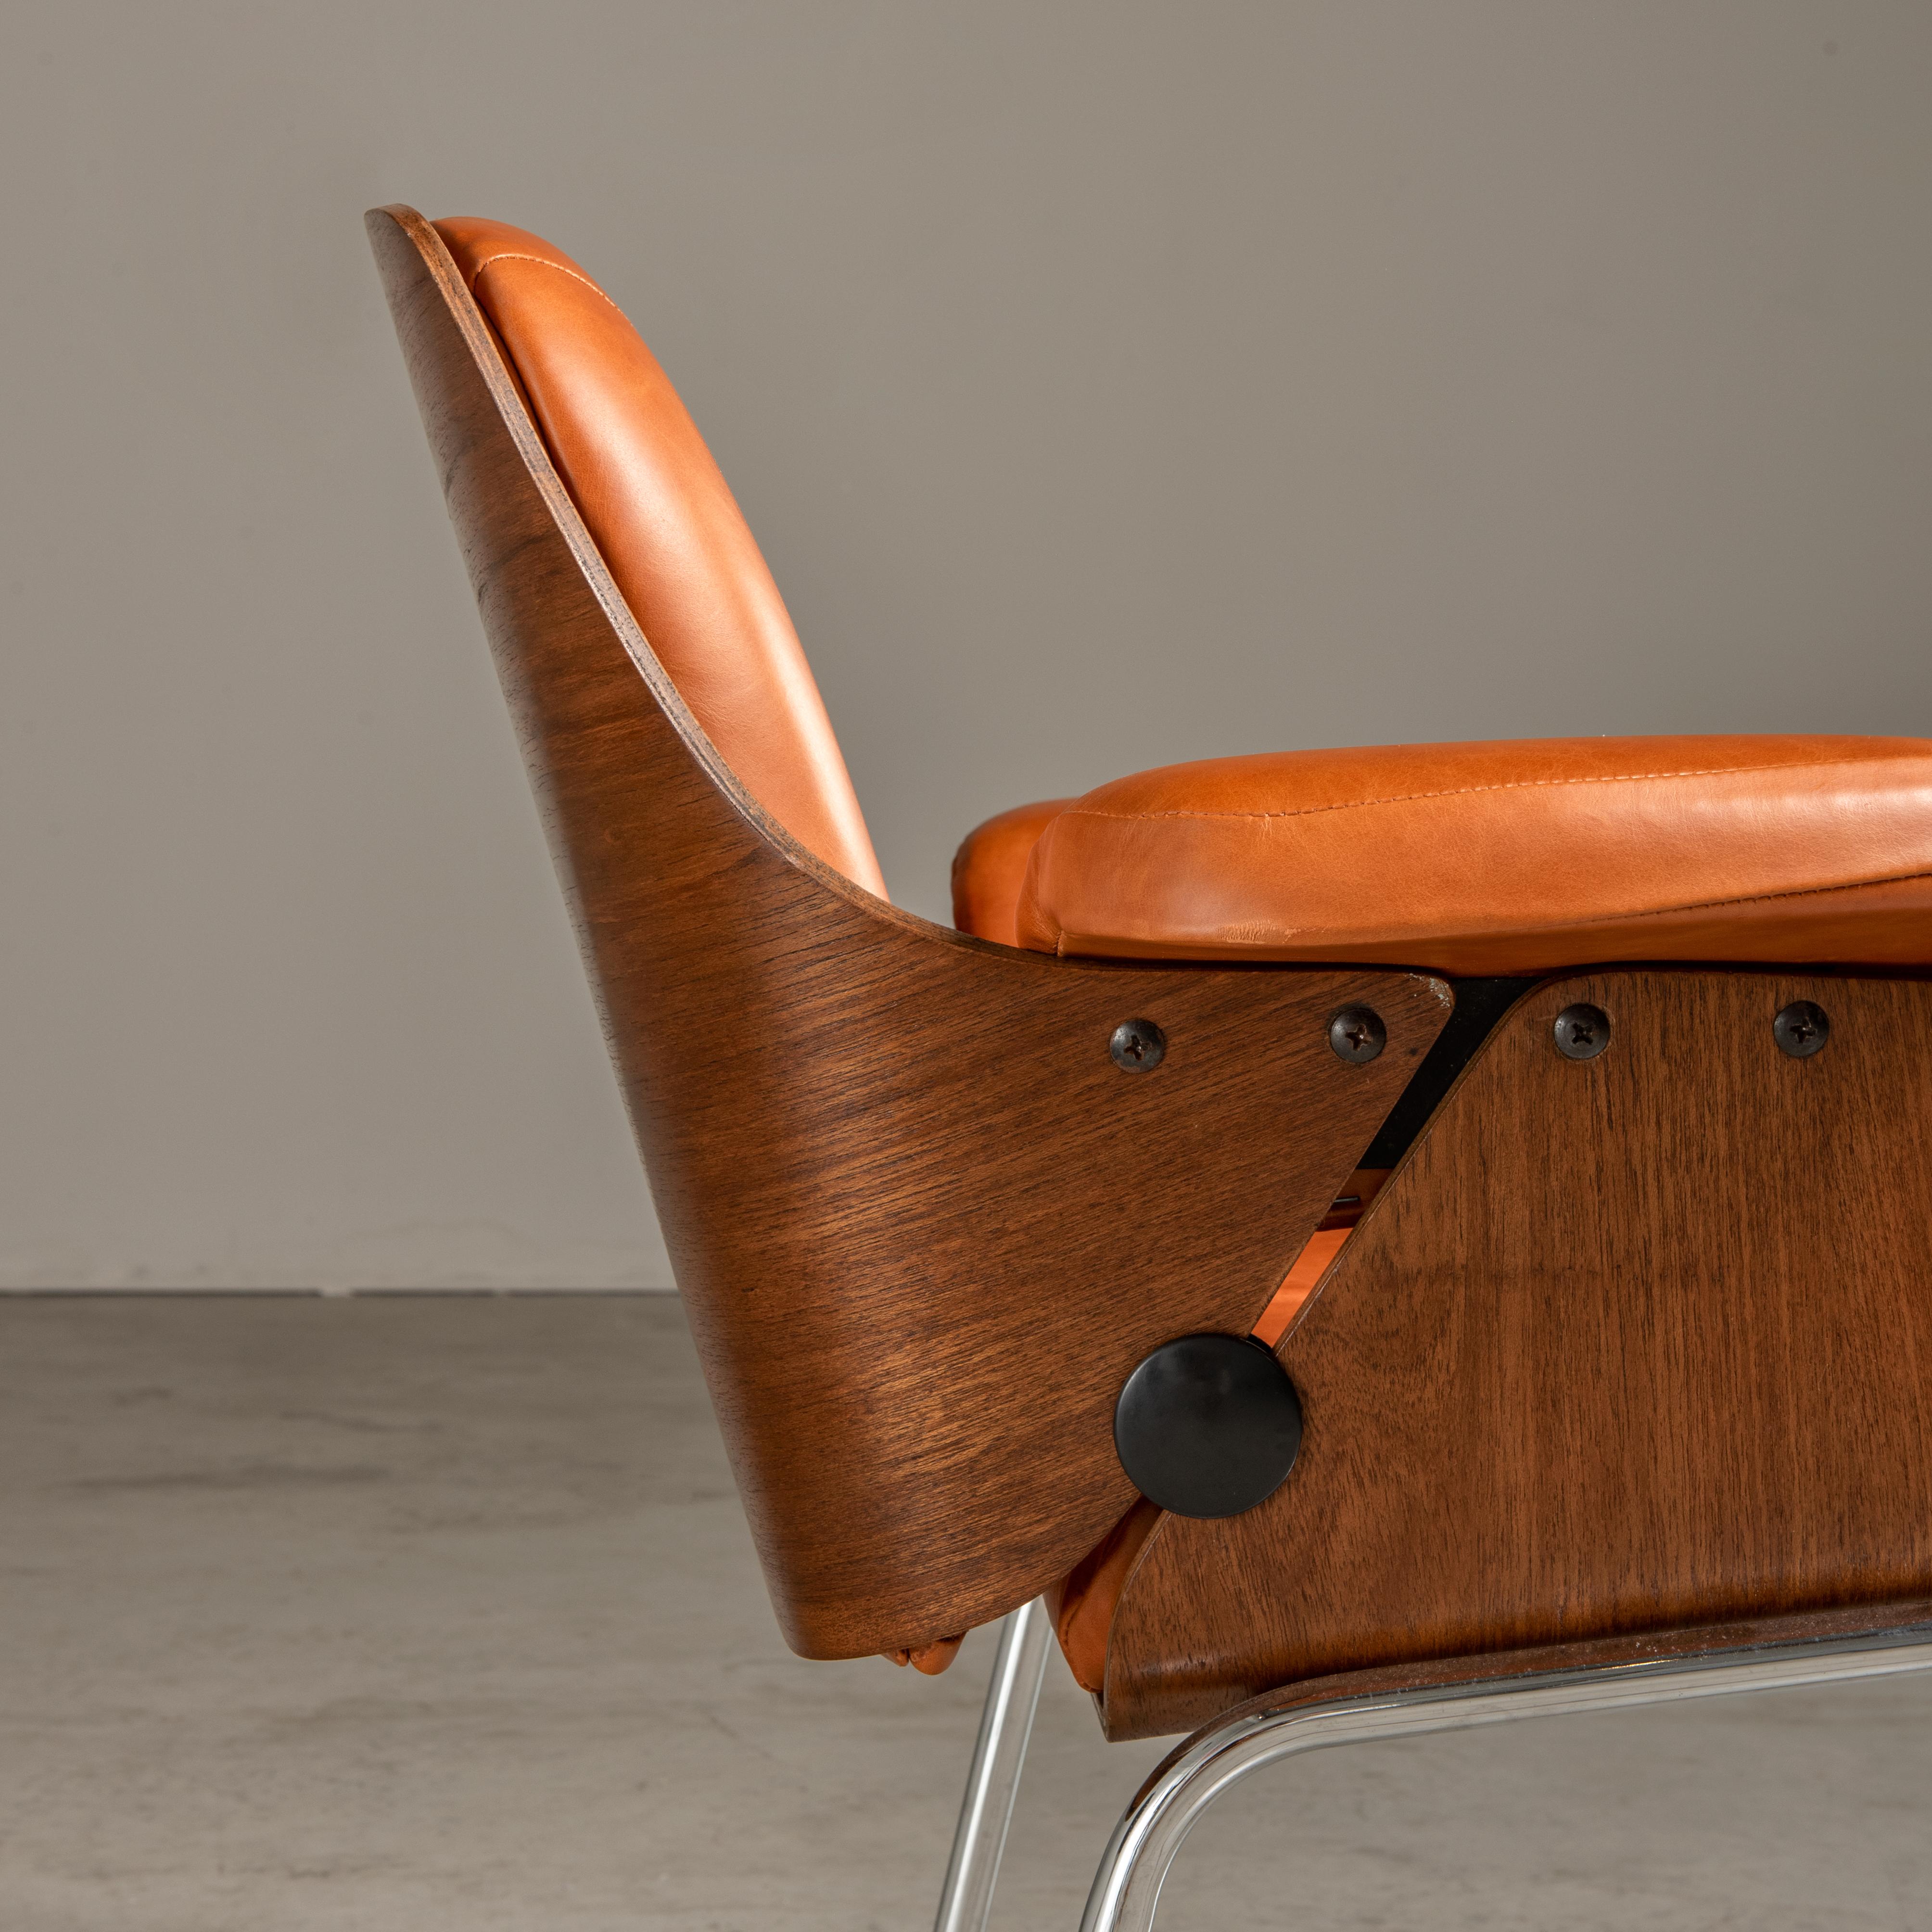 Armchair with Wood, Leather and Steel, by Carlo Fongaro, Brazilian Mid-Century In Good Condition For Sale In Sao Paulo, SP